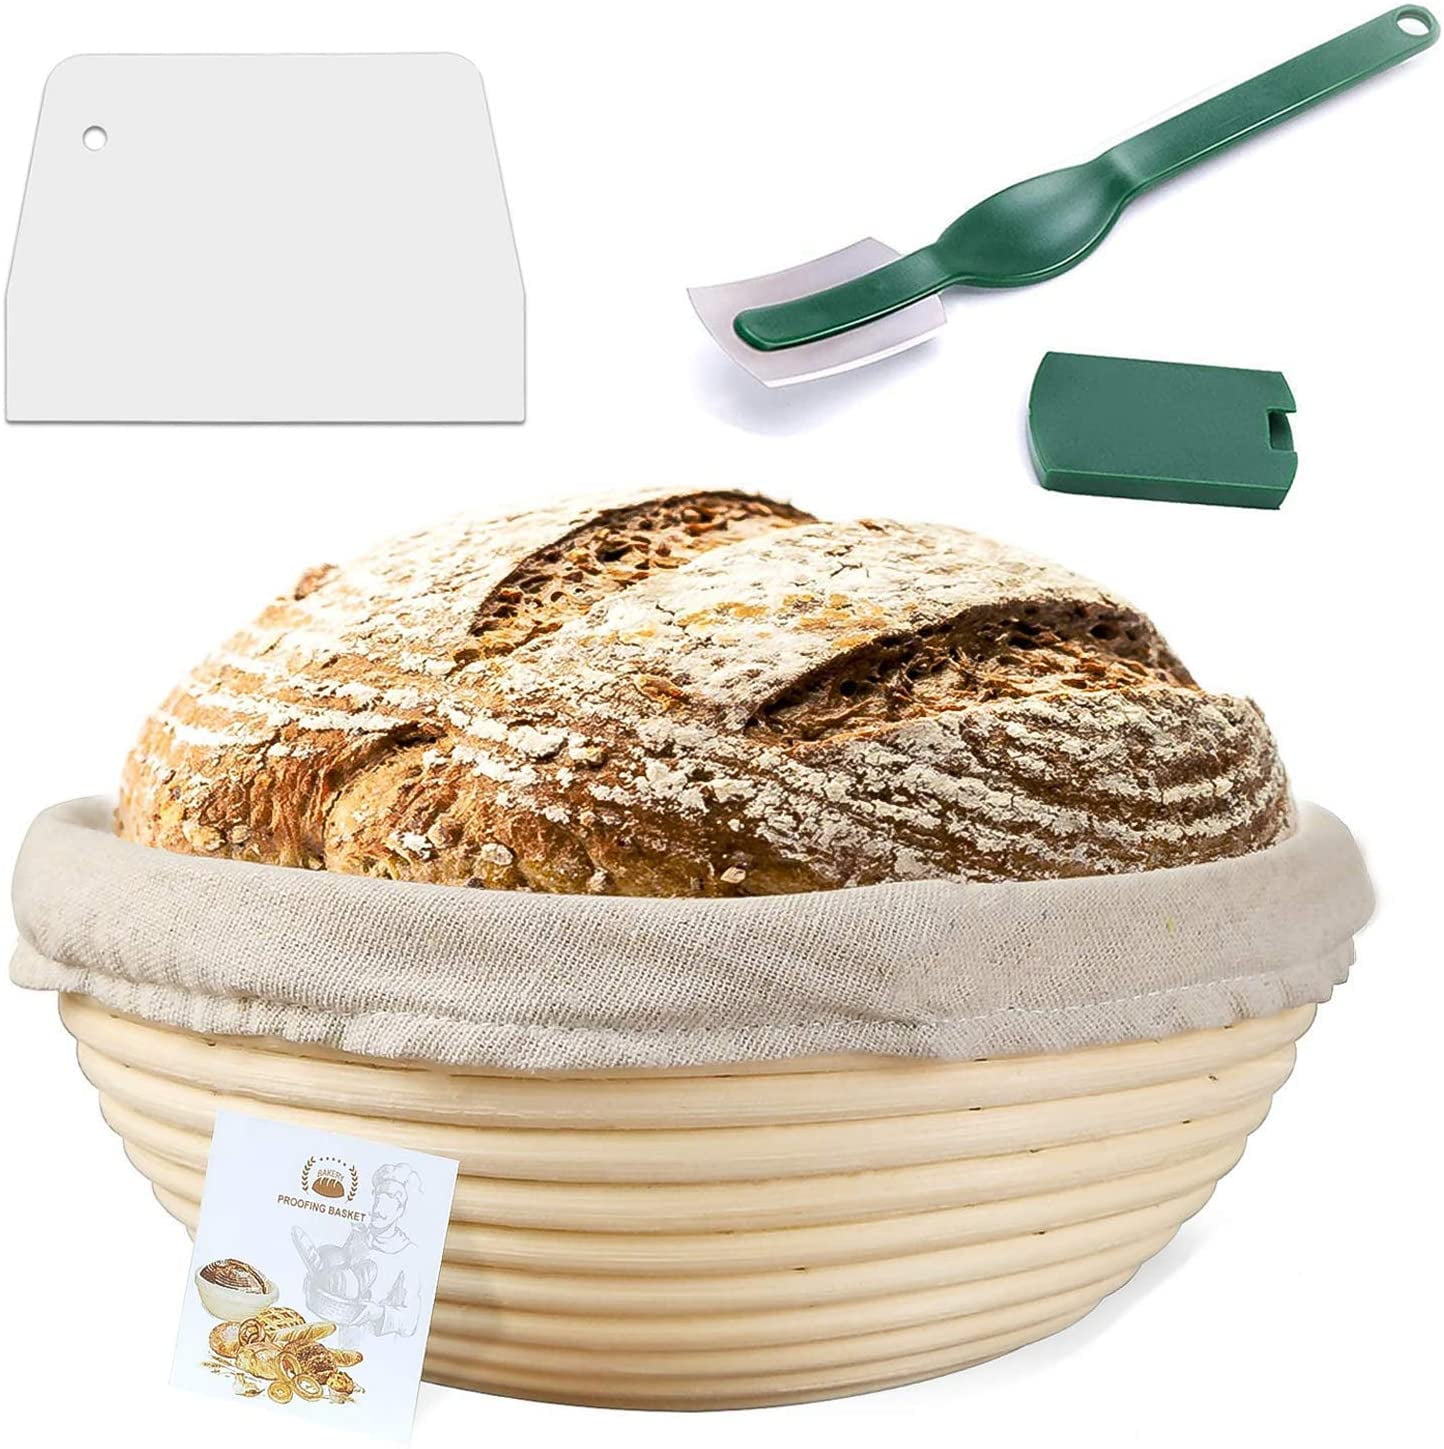 Brotform Dough Rising Rattan Handmade Rattan Bowl 2 pack of 10 inch Sourdough Bread Bakery Basket with Green Scraper,Oval Bread Banneton Proofing Basket with Linen Liner Cloth 